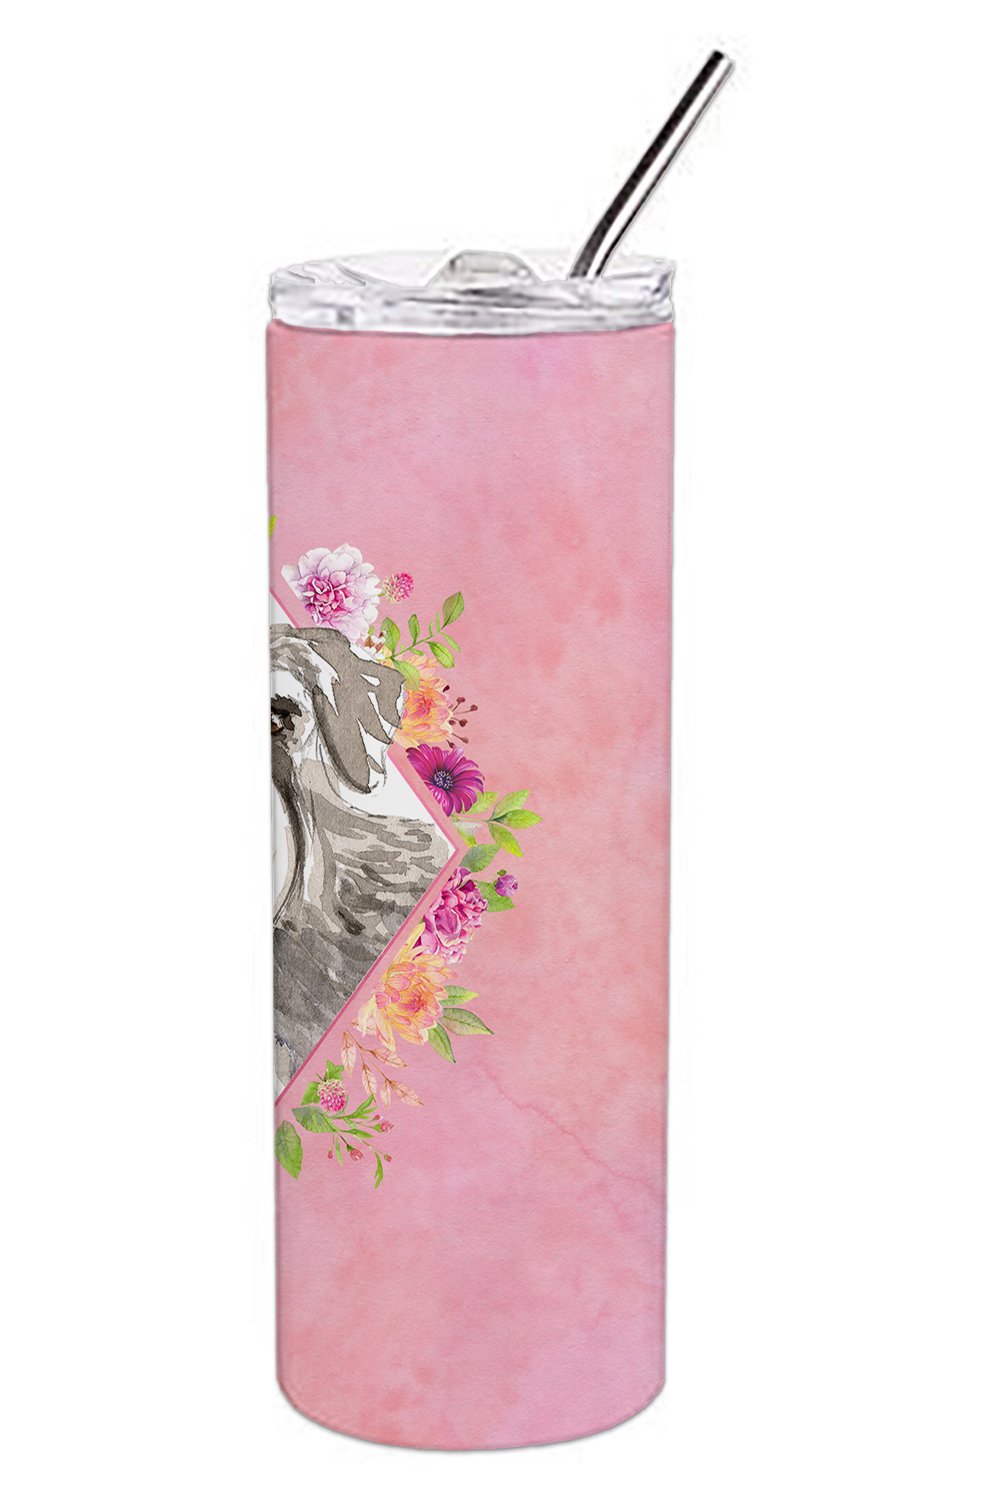 Schnauzer #1 Pink Flowers Double Walled Stainless Steel 20 oz Skinny Tumbler CK4215TBL20 by Caroline's Treasures